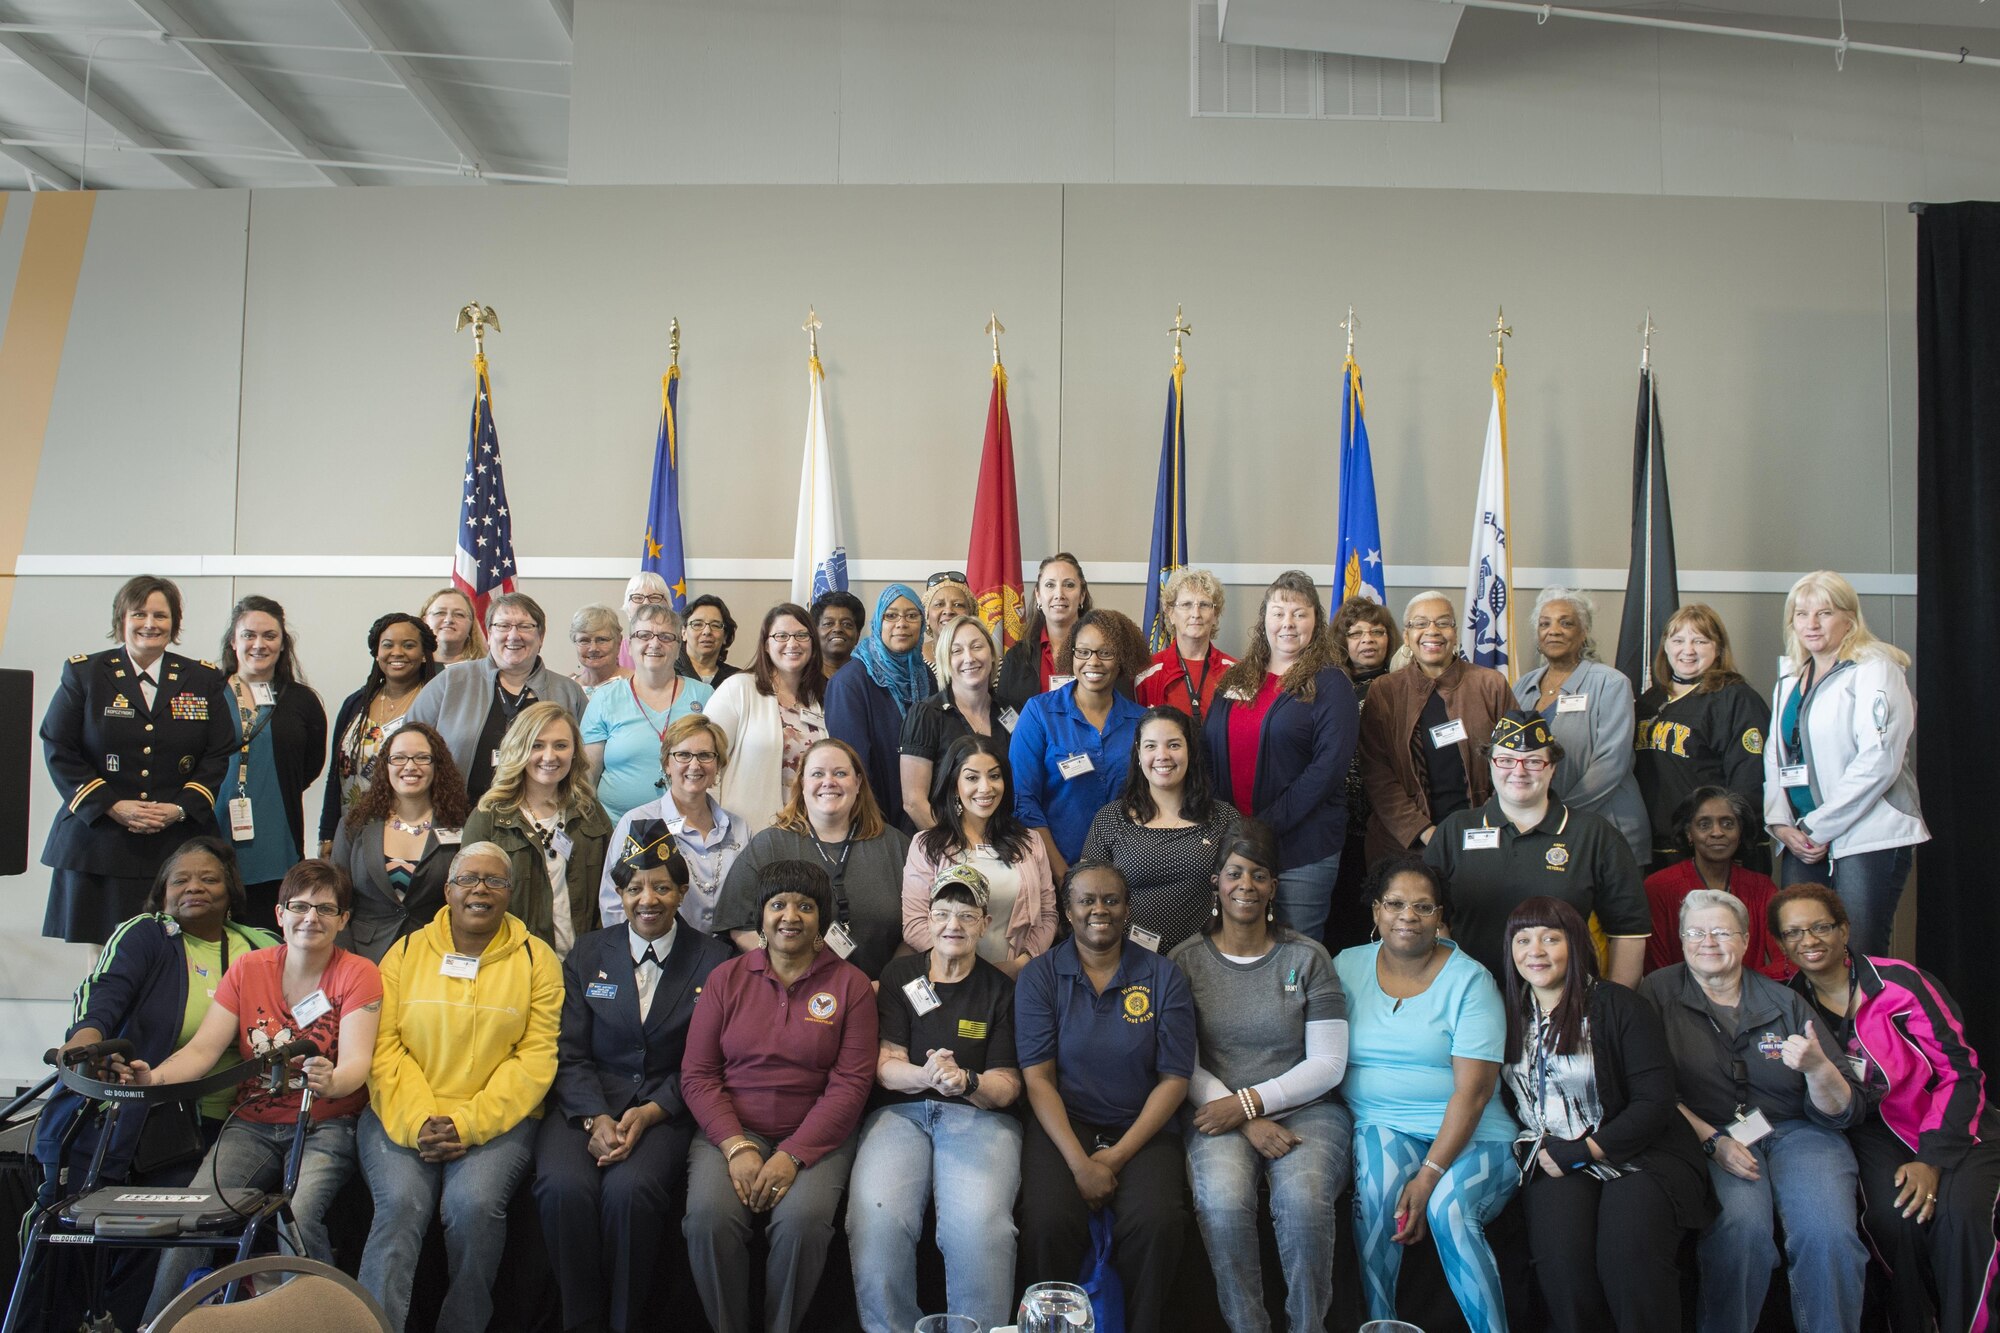 United States Army veterans pose for a photo during the 2016 Indiana Woman Veterans’ Conference in Indianapolis, April 14, 2016. The event was held to bring awareness to Indiana women veterans and also provided a variety of workshops for attendees. (U.S. Air Force photo/Tech. Sgt. Benjamin Mota)